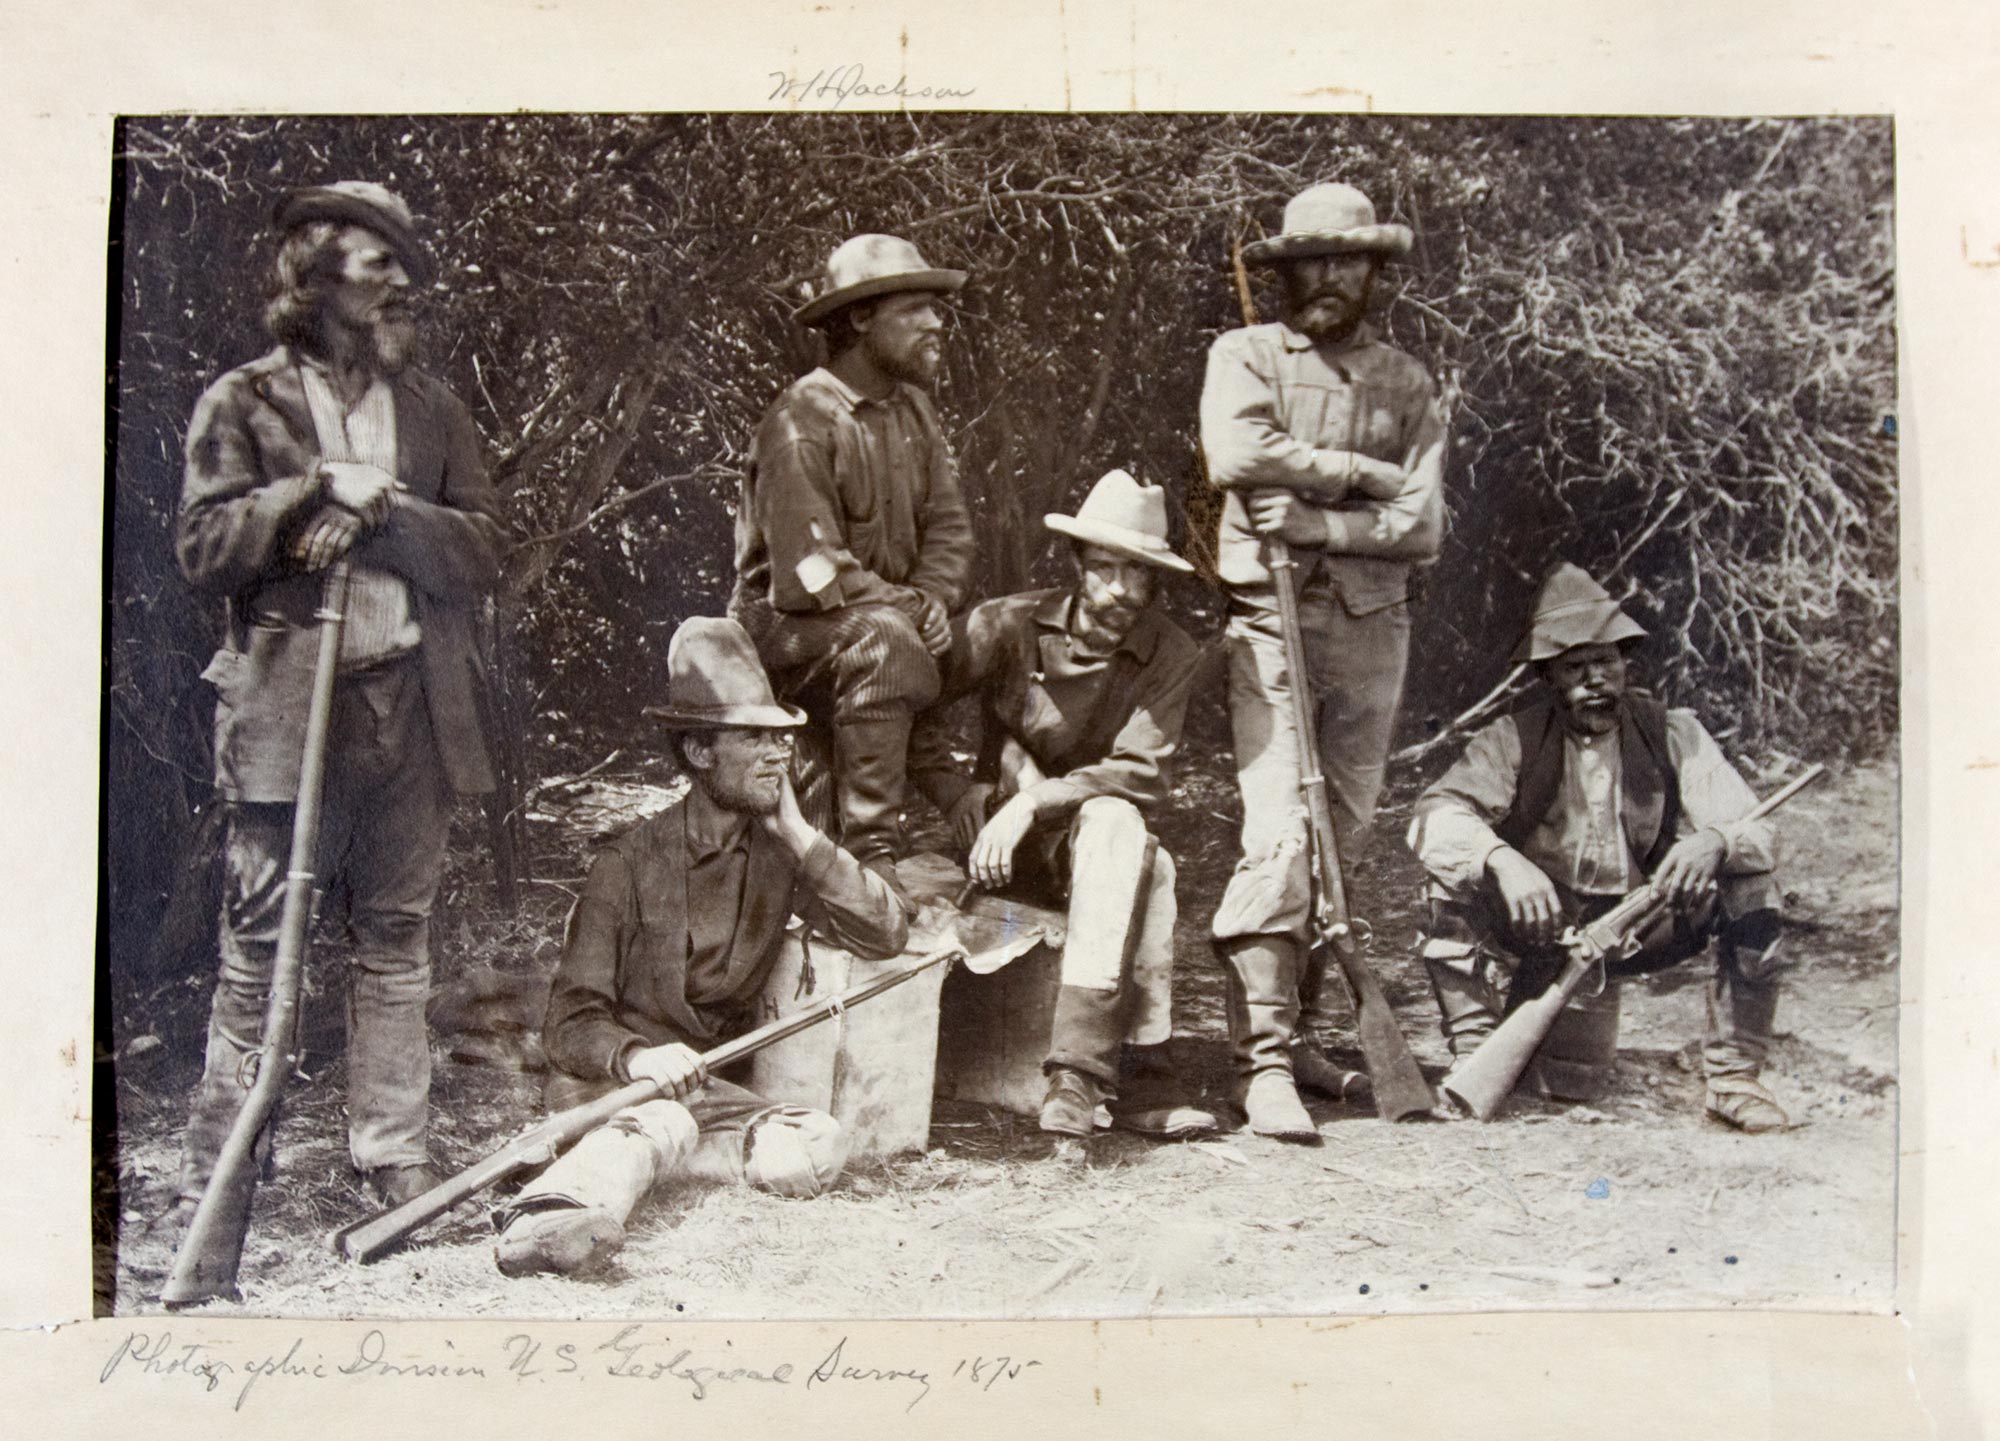 Photographic Division, US Geological Survey 1875